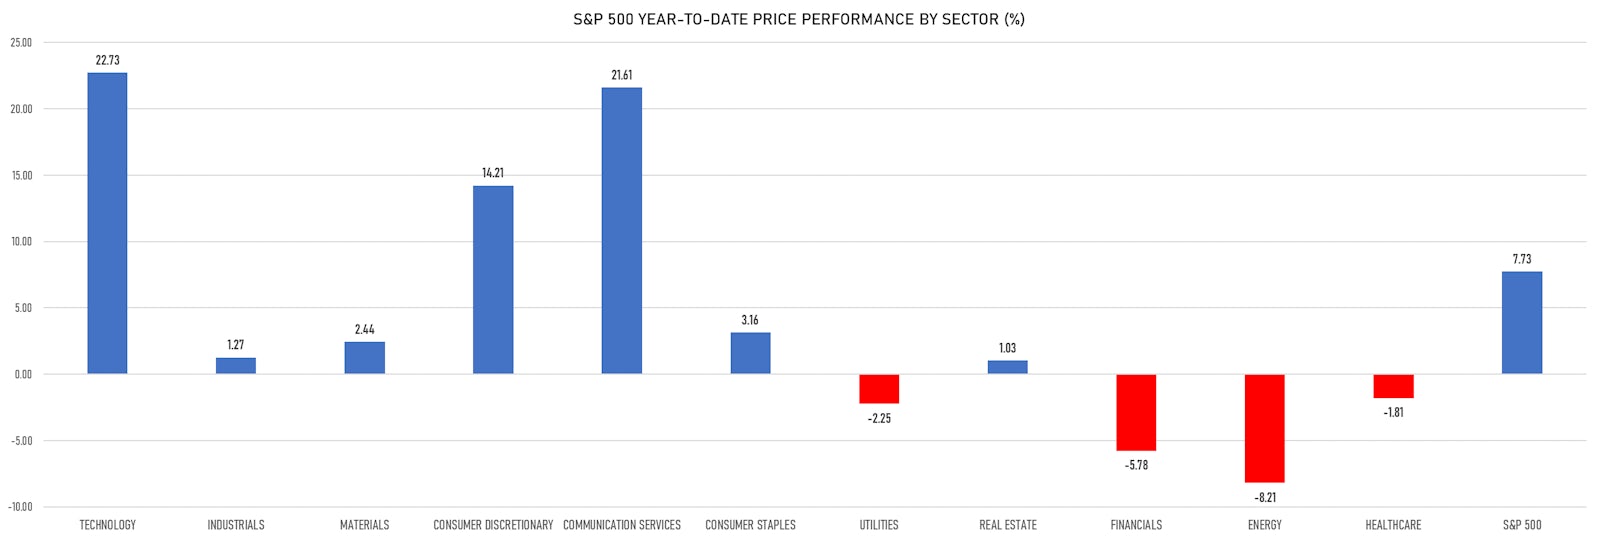 S&P 500 YTD Price performance by sector | Sources: phipost.com, Refinitiv data 